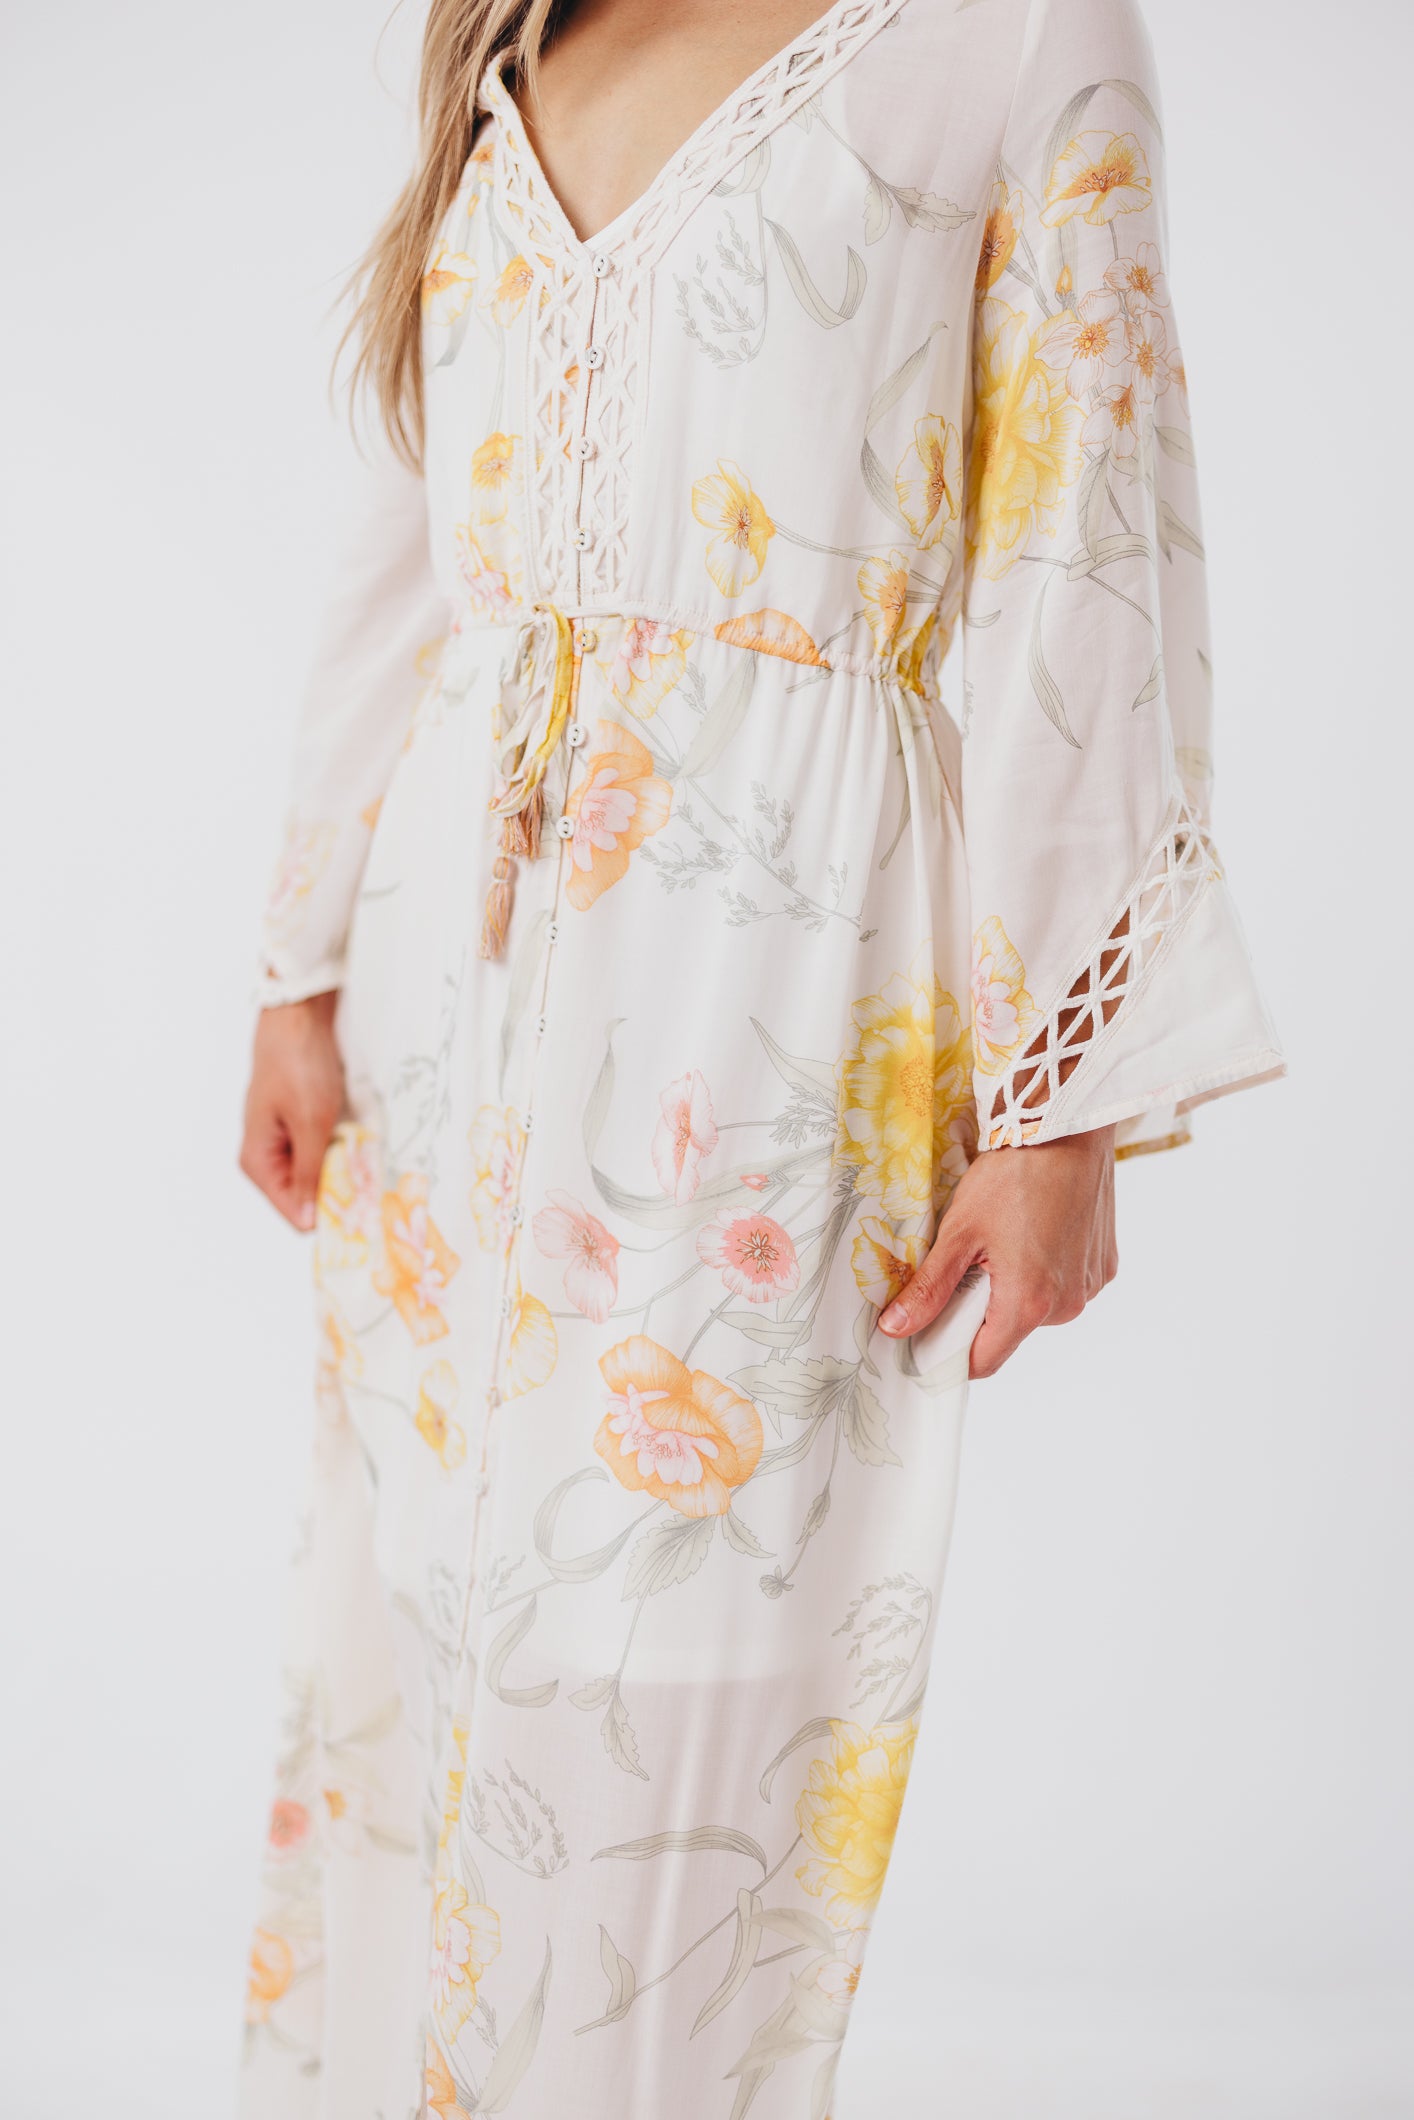 Sophie Flowy Long-sleeved Maxi Dress with Button-Up Front in Vanilla/Coral Floral - Nursing Friendly